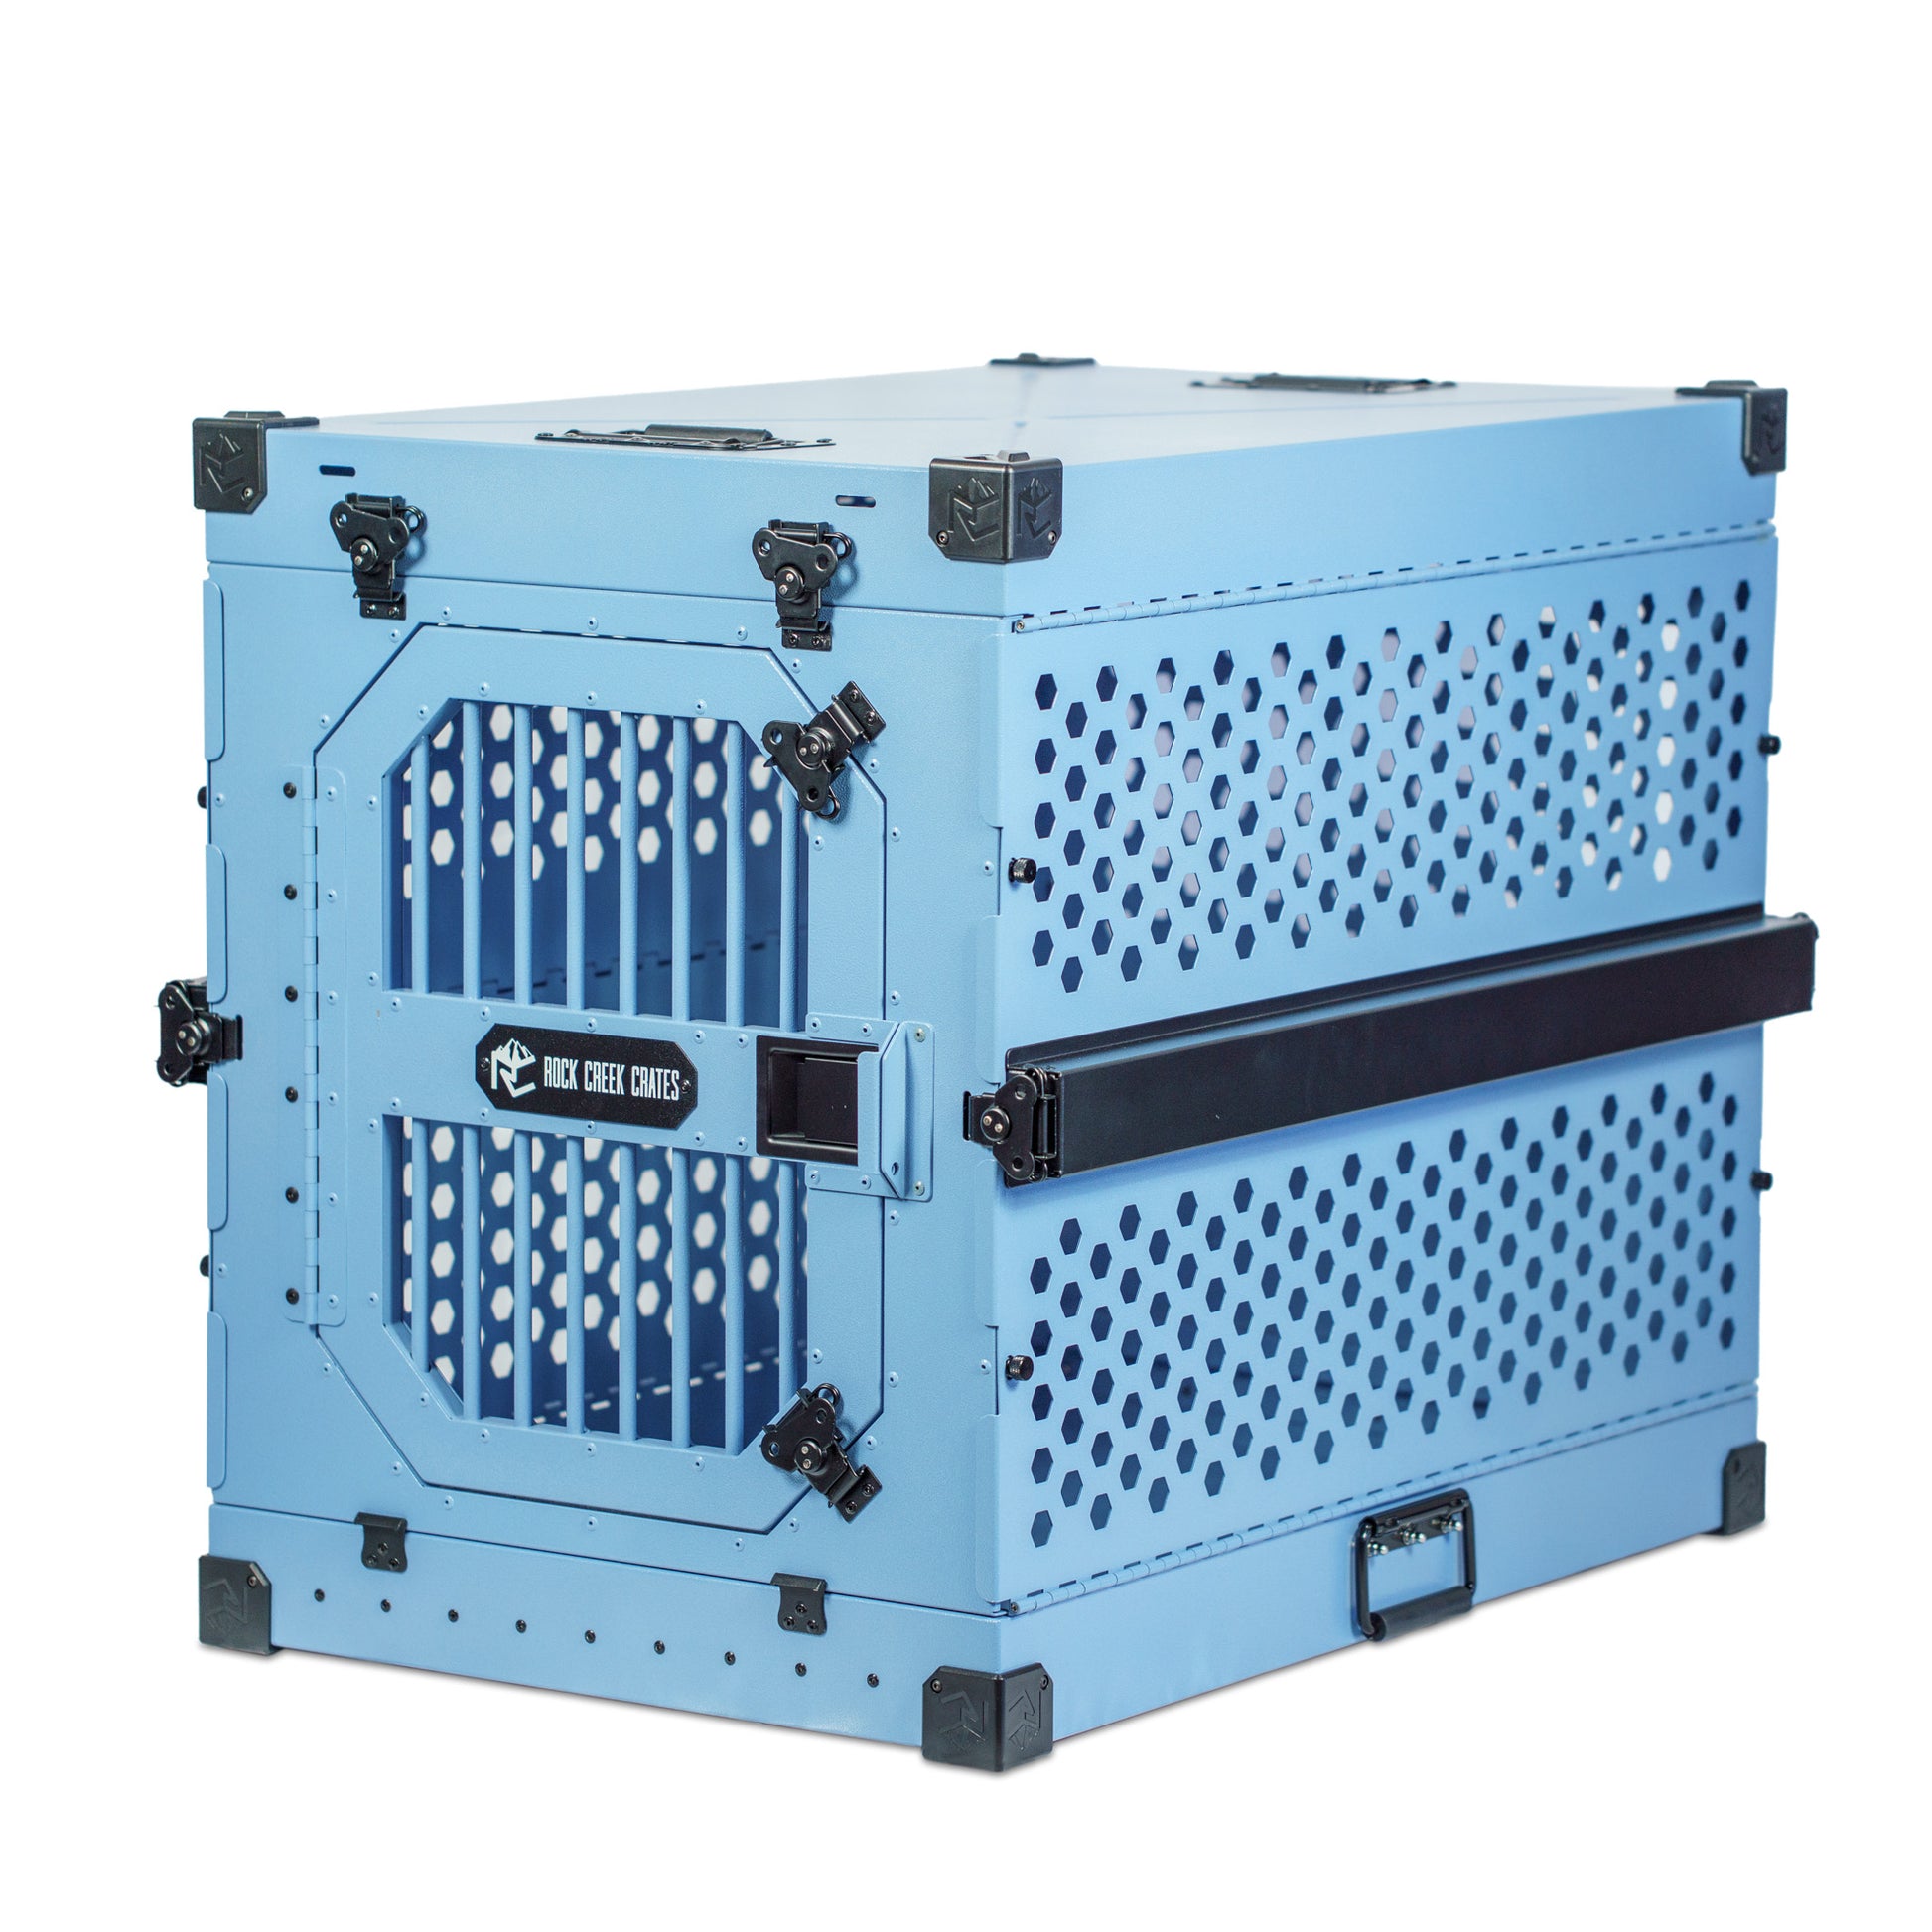 Blue collapsible dog crate by Rock Creek Crates